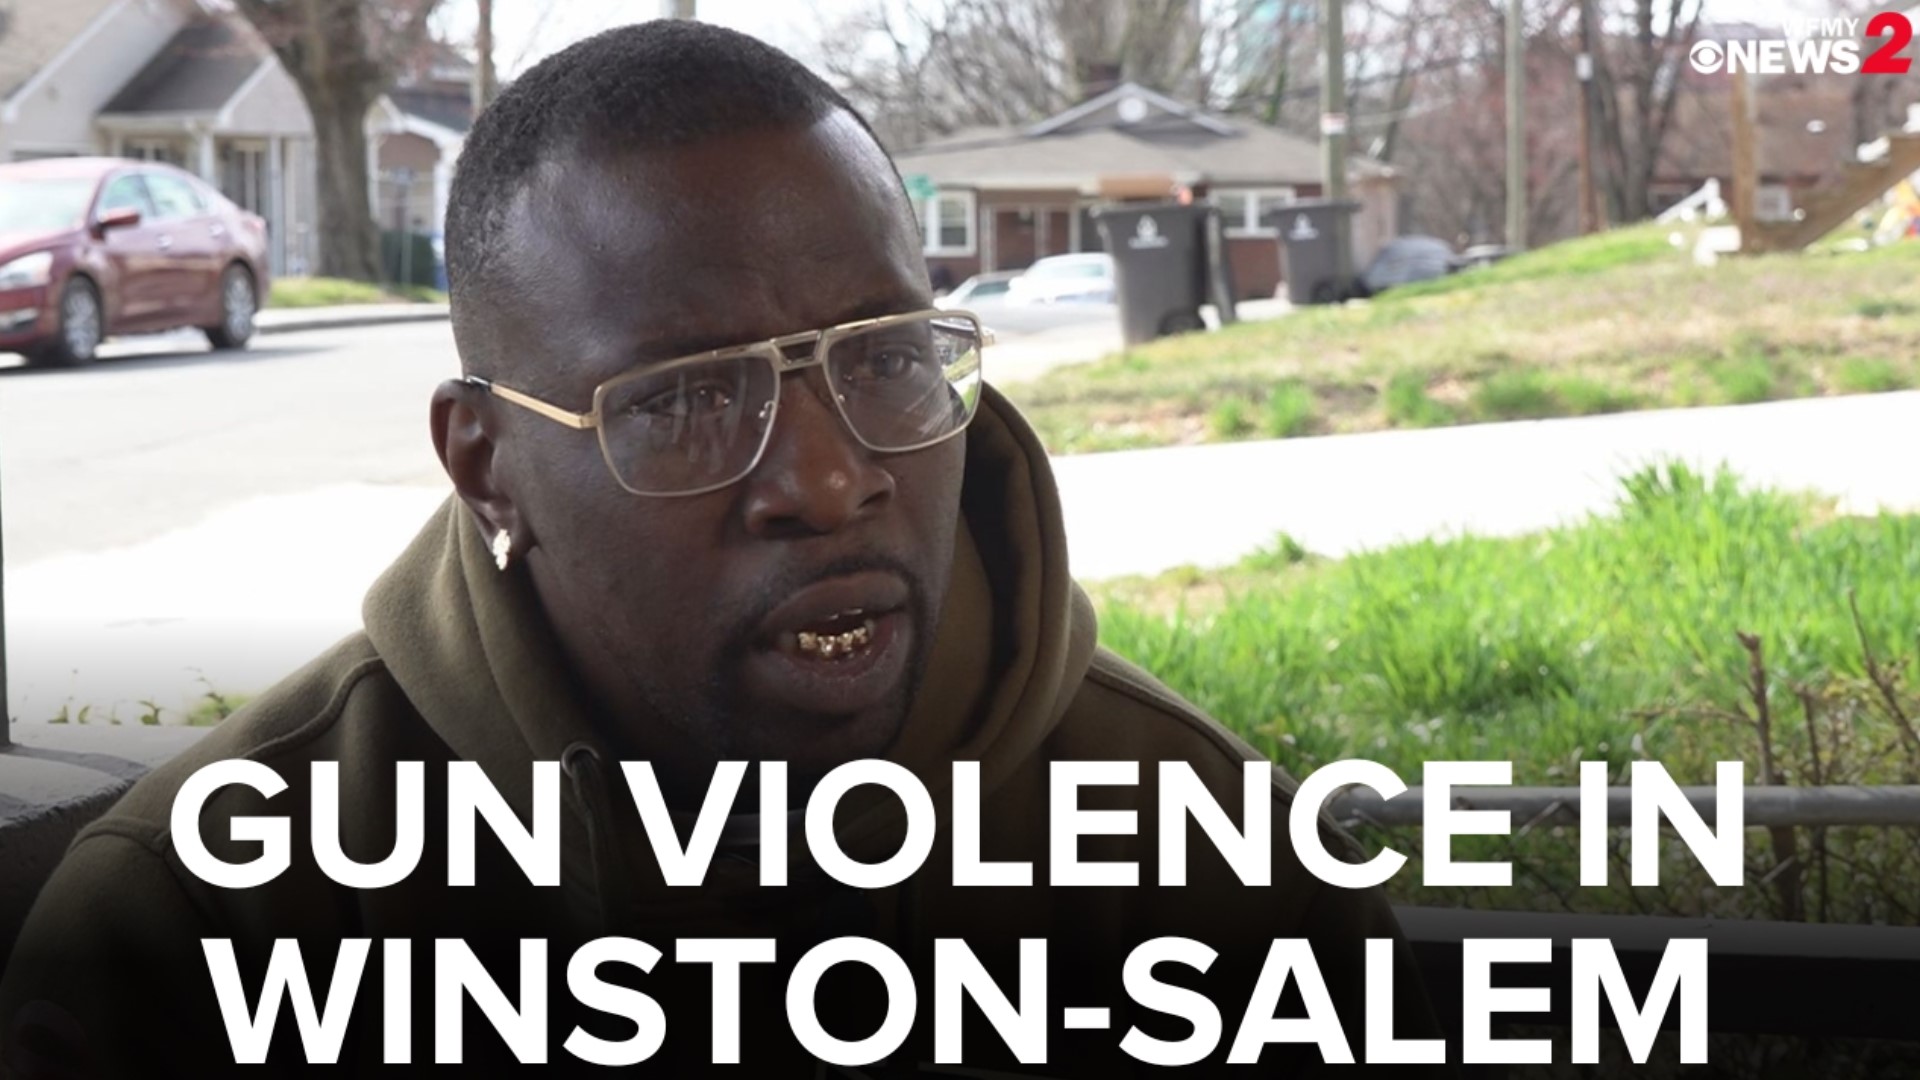 Officials are calling for the community to help bring crime and gun violence in Winston-Salem to an end.